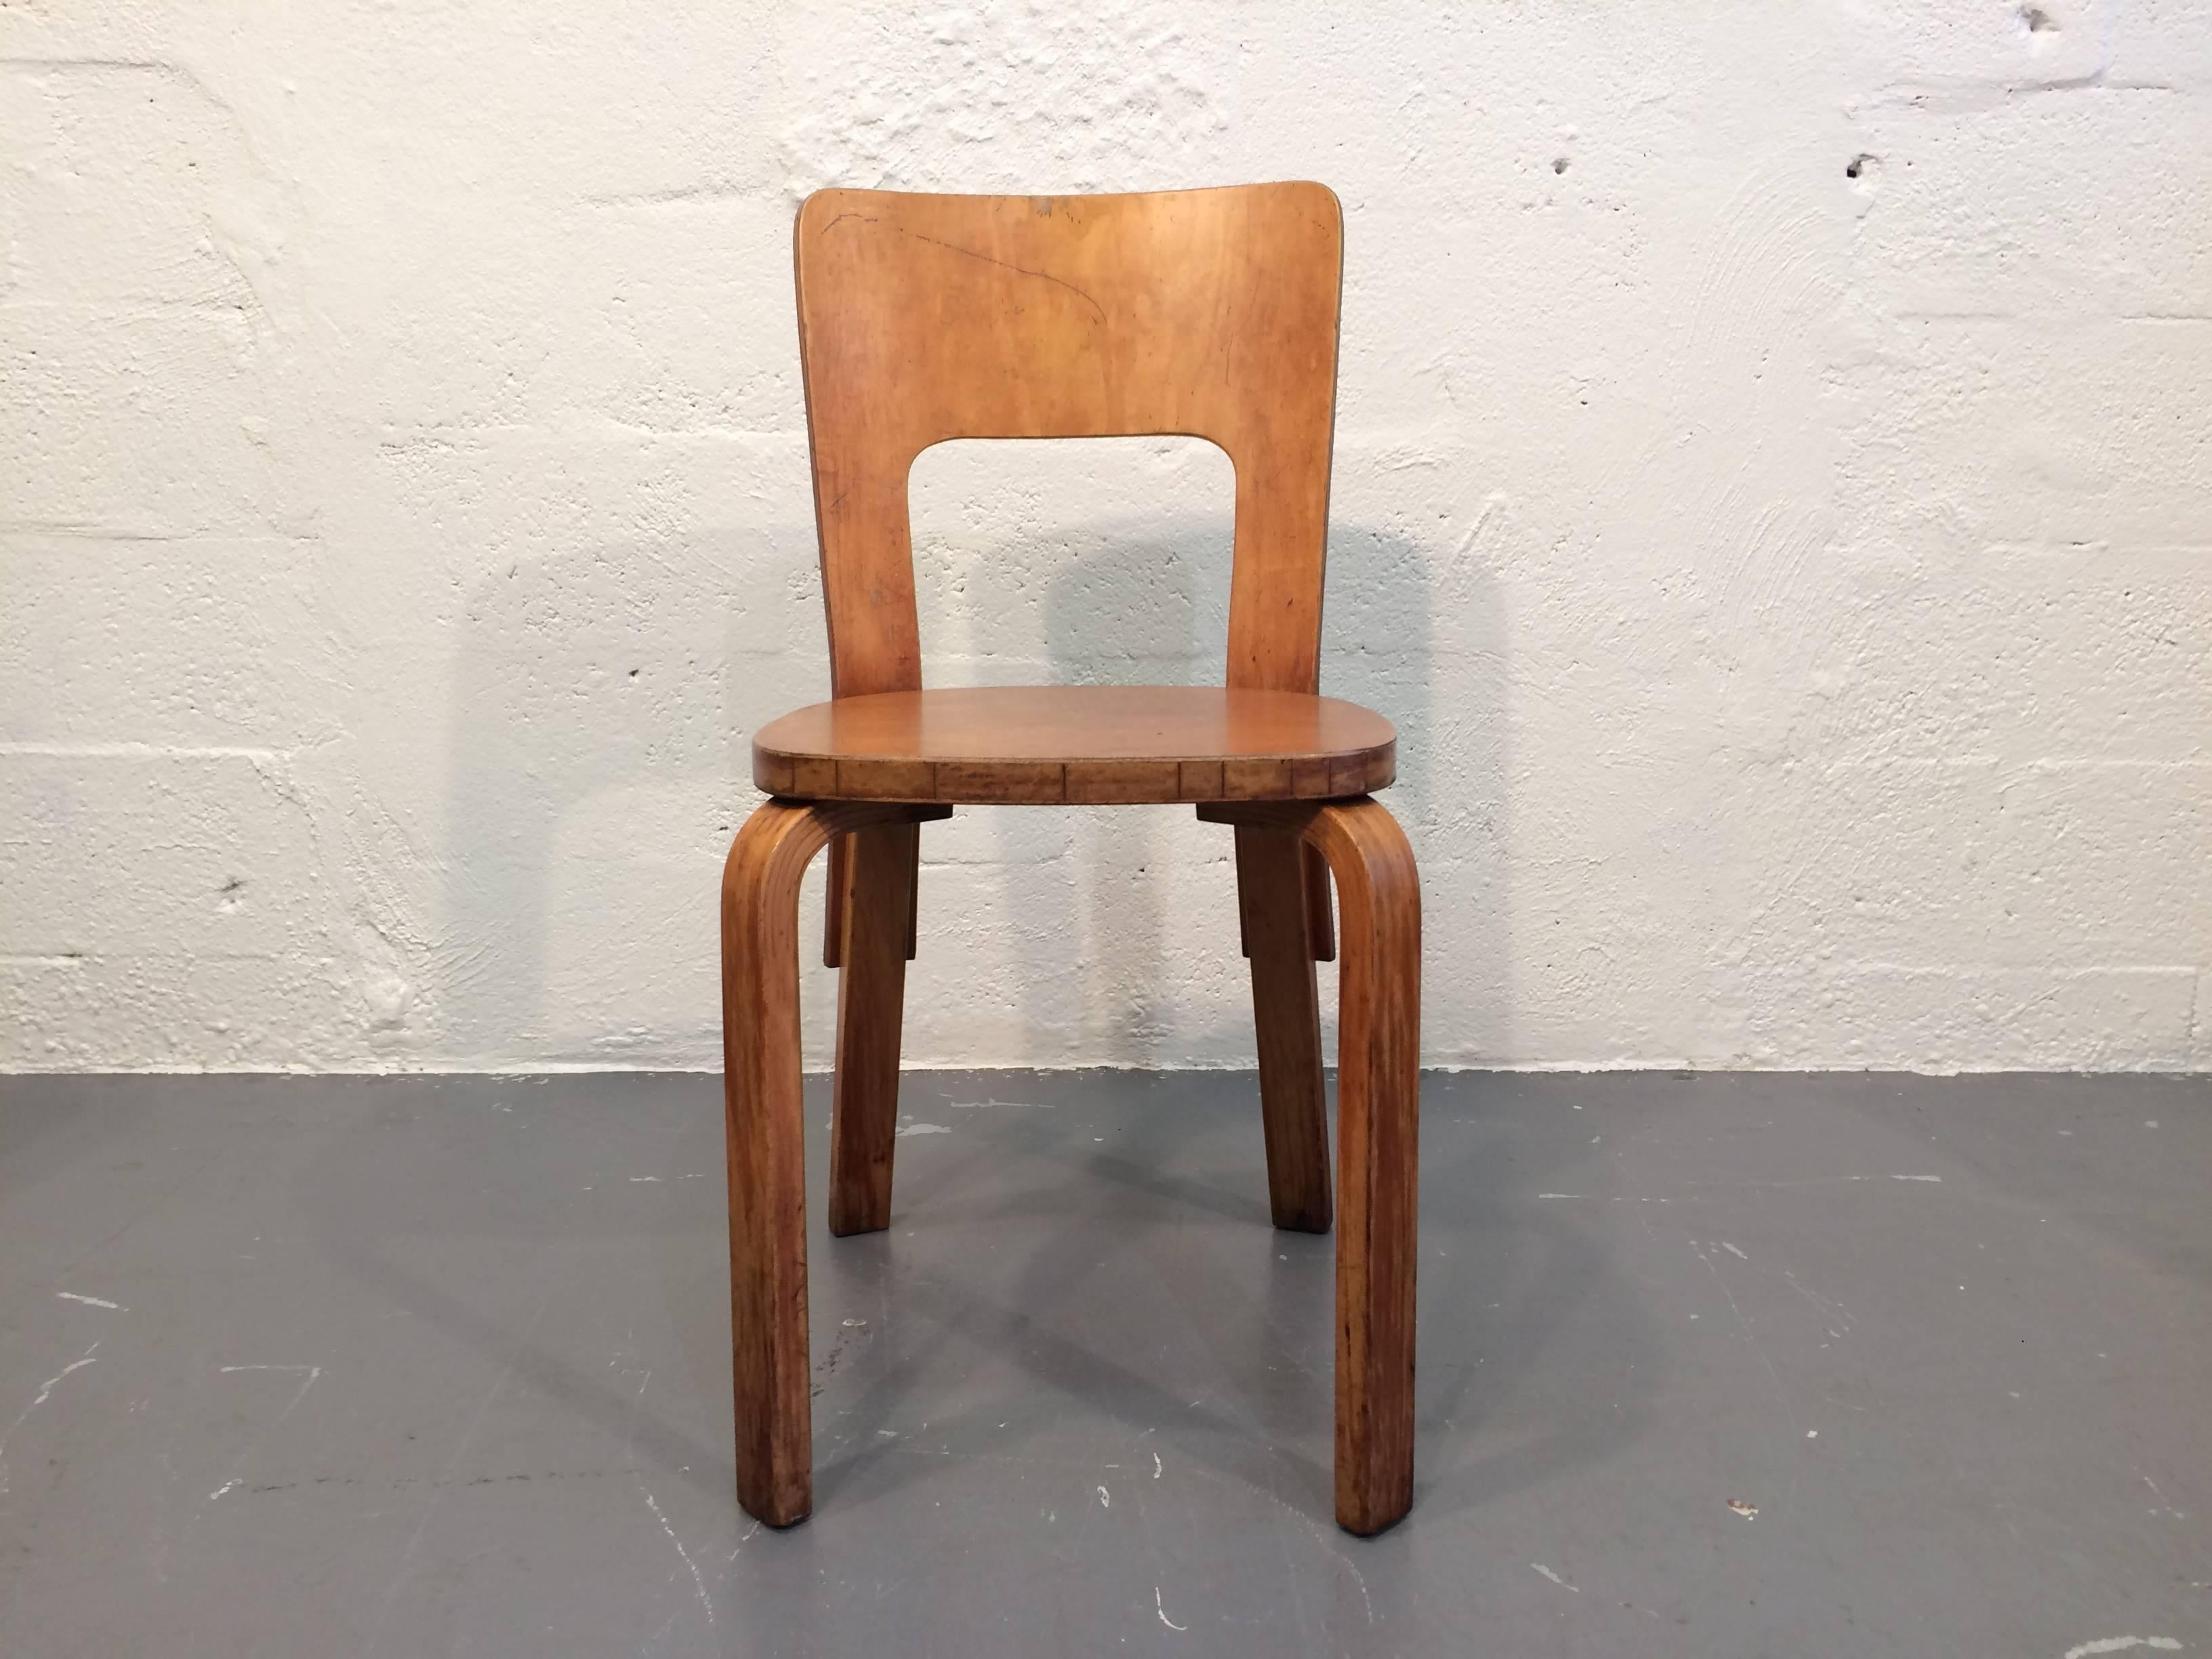 For him who loves patina, great early Alvar Aalto chair.